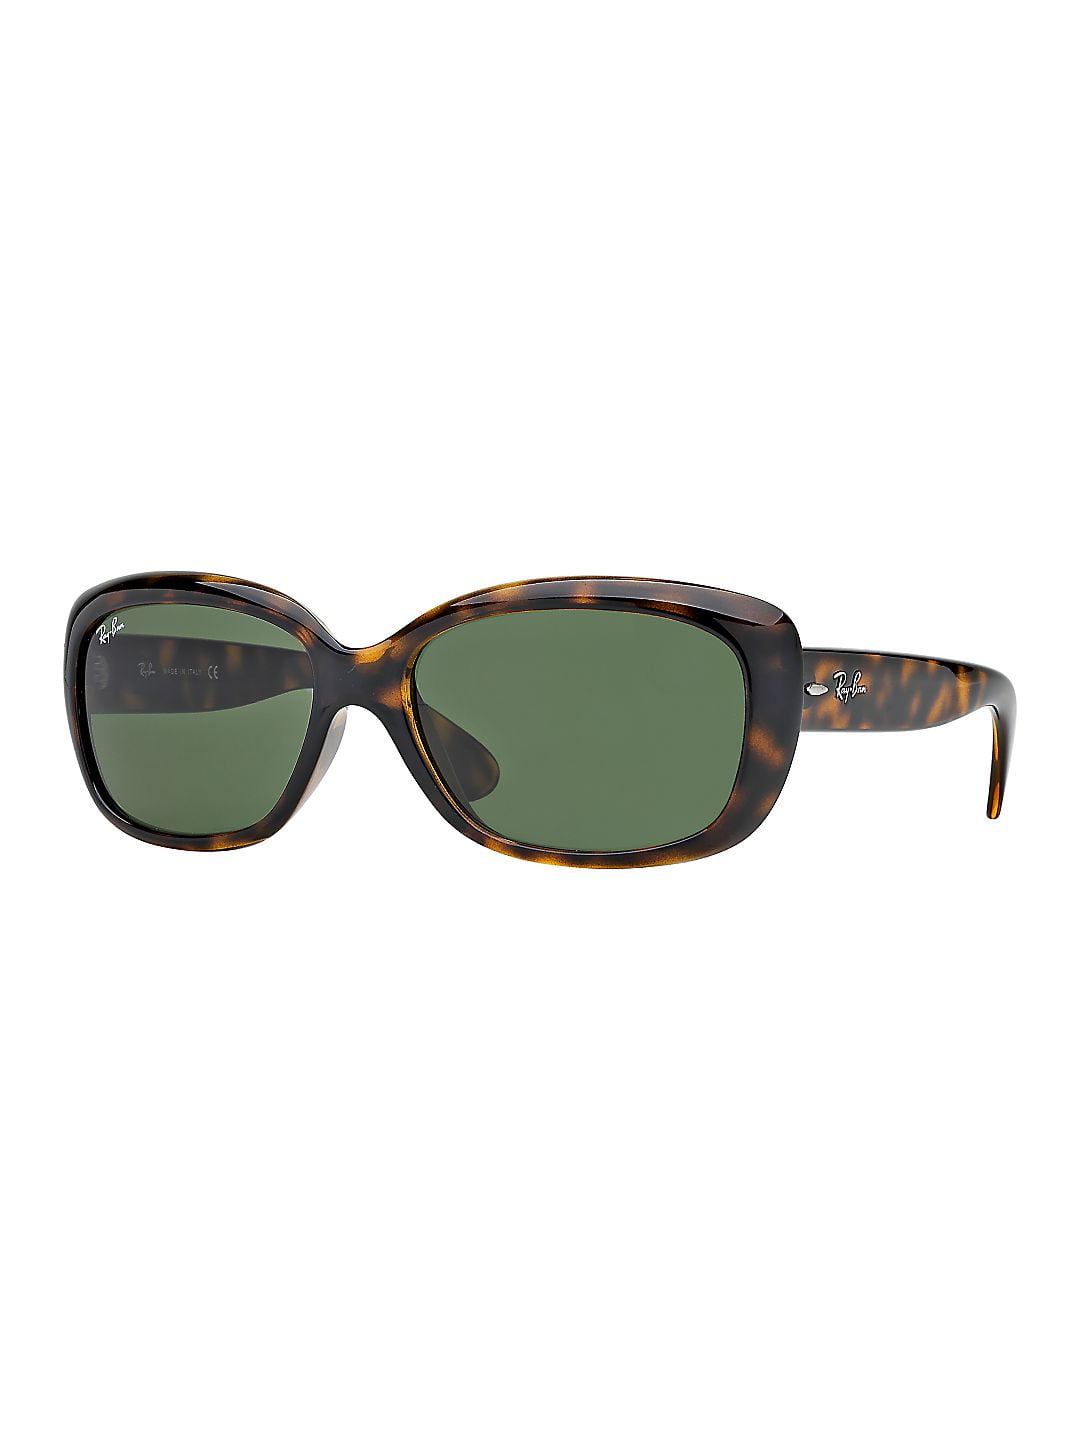 Ray-Ban Women's RB4101 Jackie Ohh Sunglasses, 58mm 